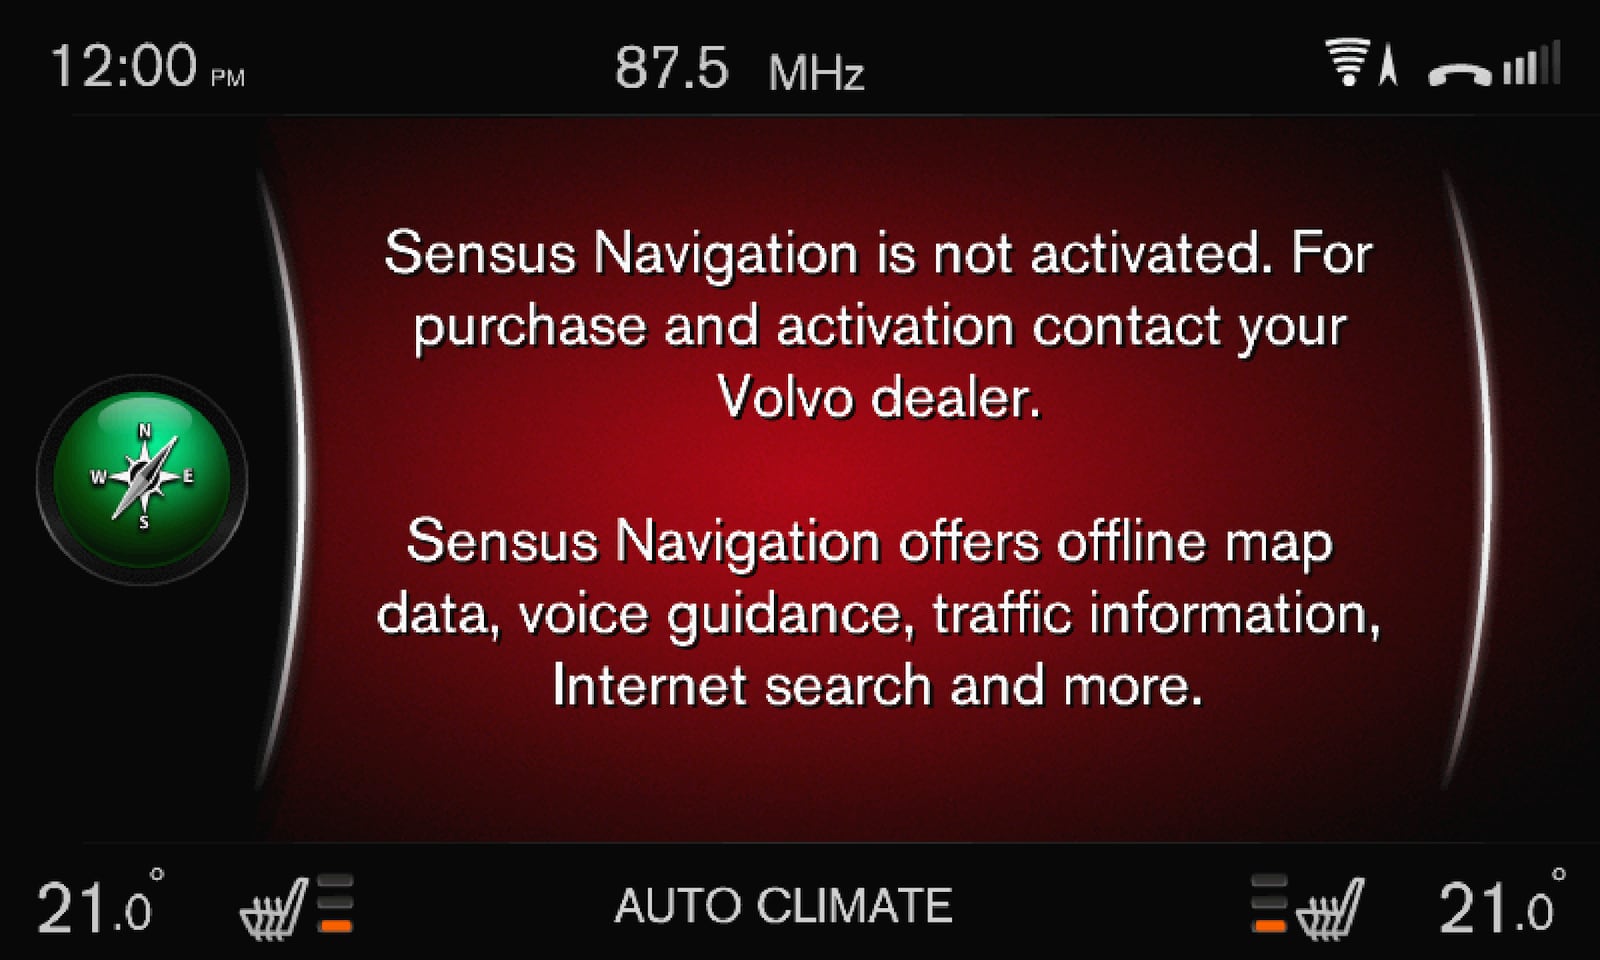 P3/P4 - Support site - Information about Sensus Navigation purchase and activation